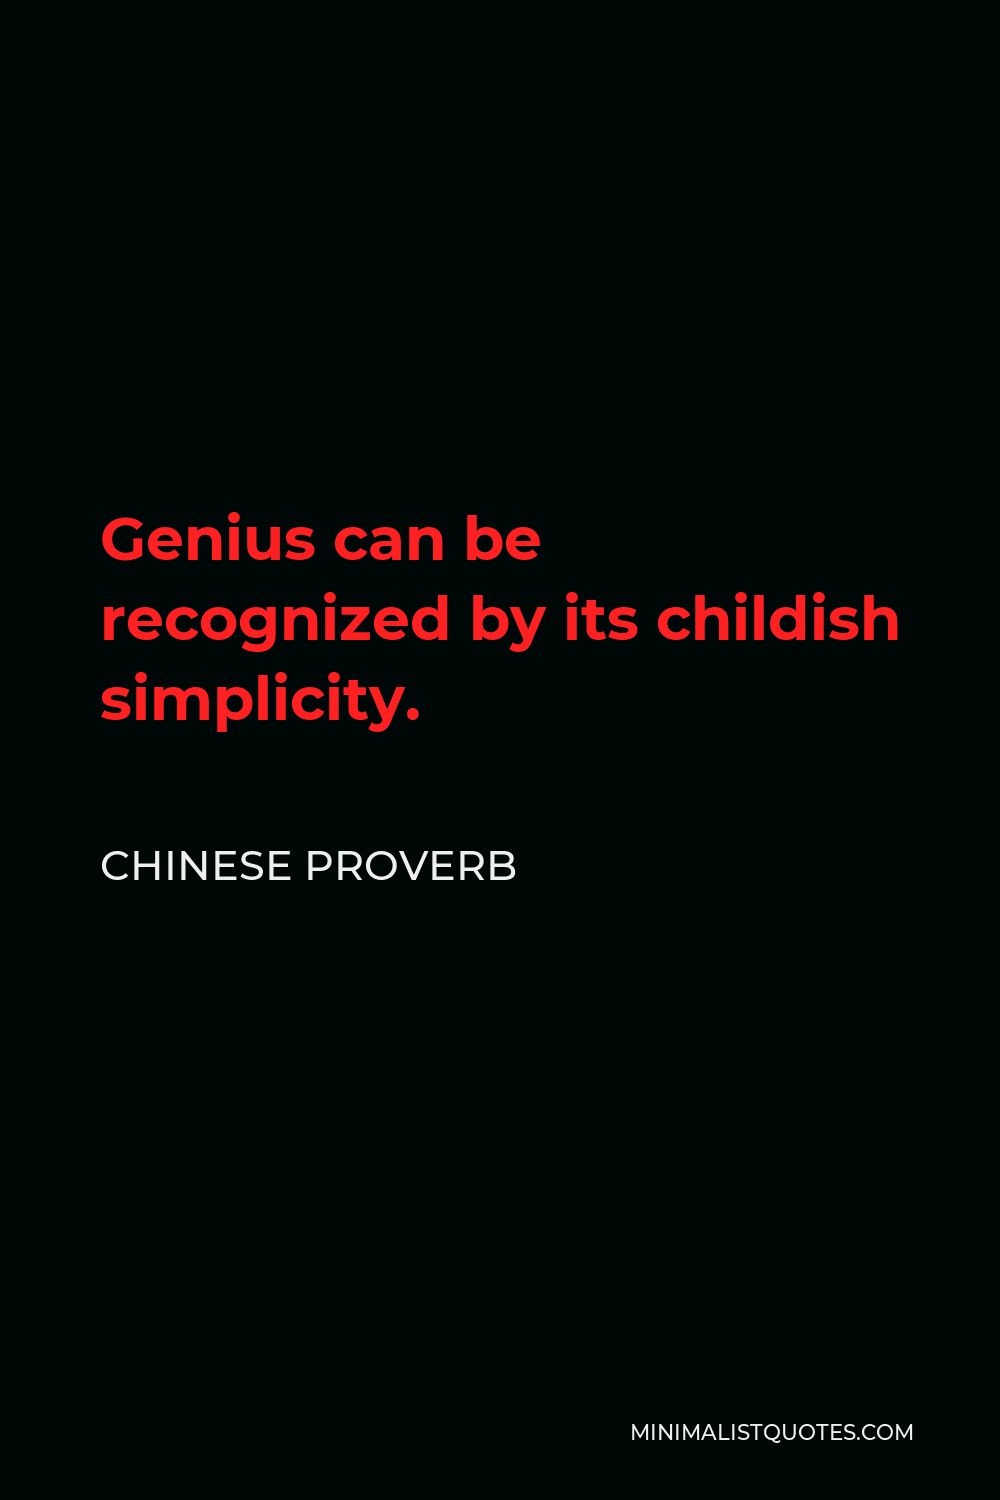 Chinese Proverb Quote - Genius can be recognized by its childish simplicity.